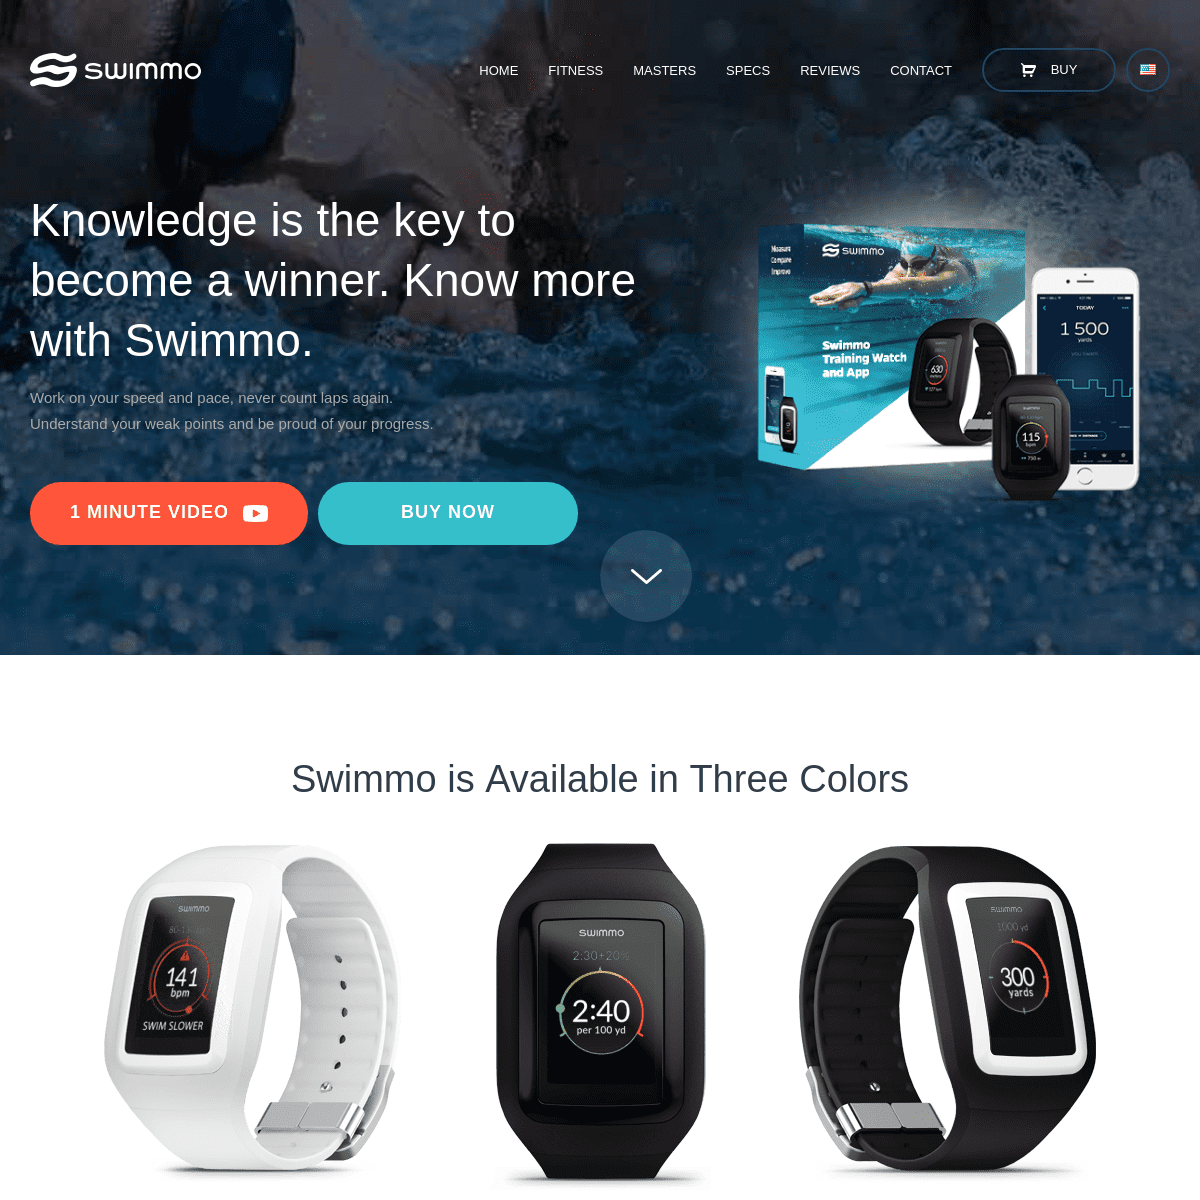 A complete backup of swimmo.com